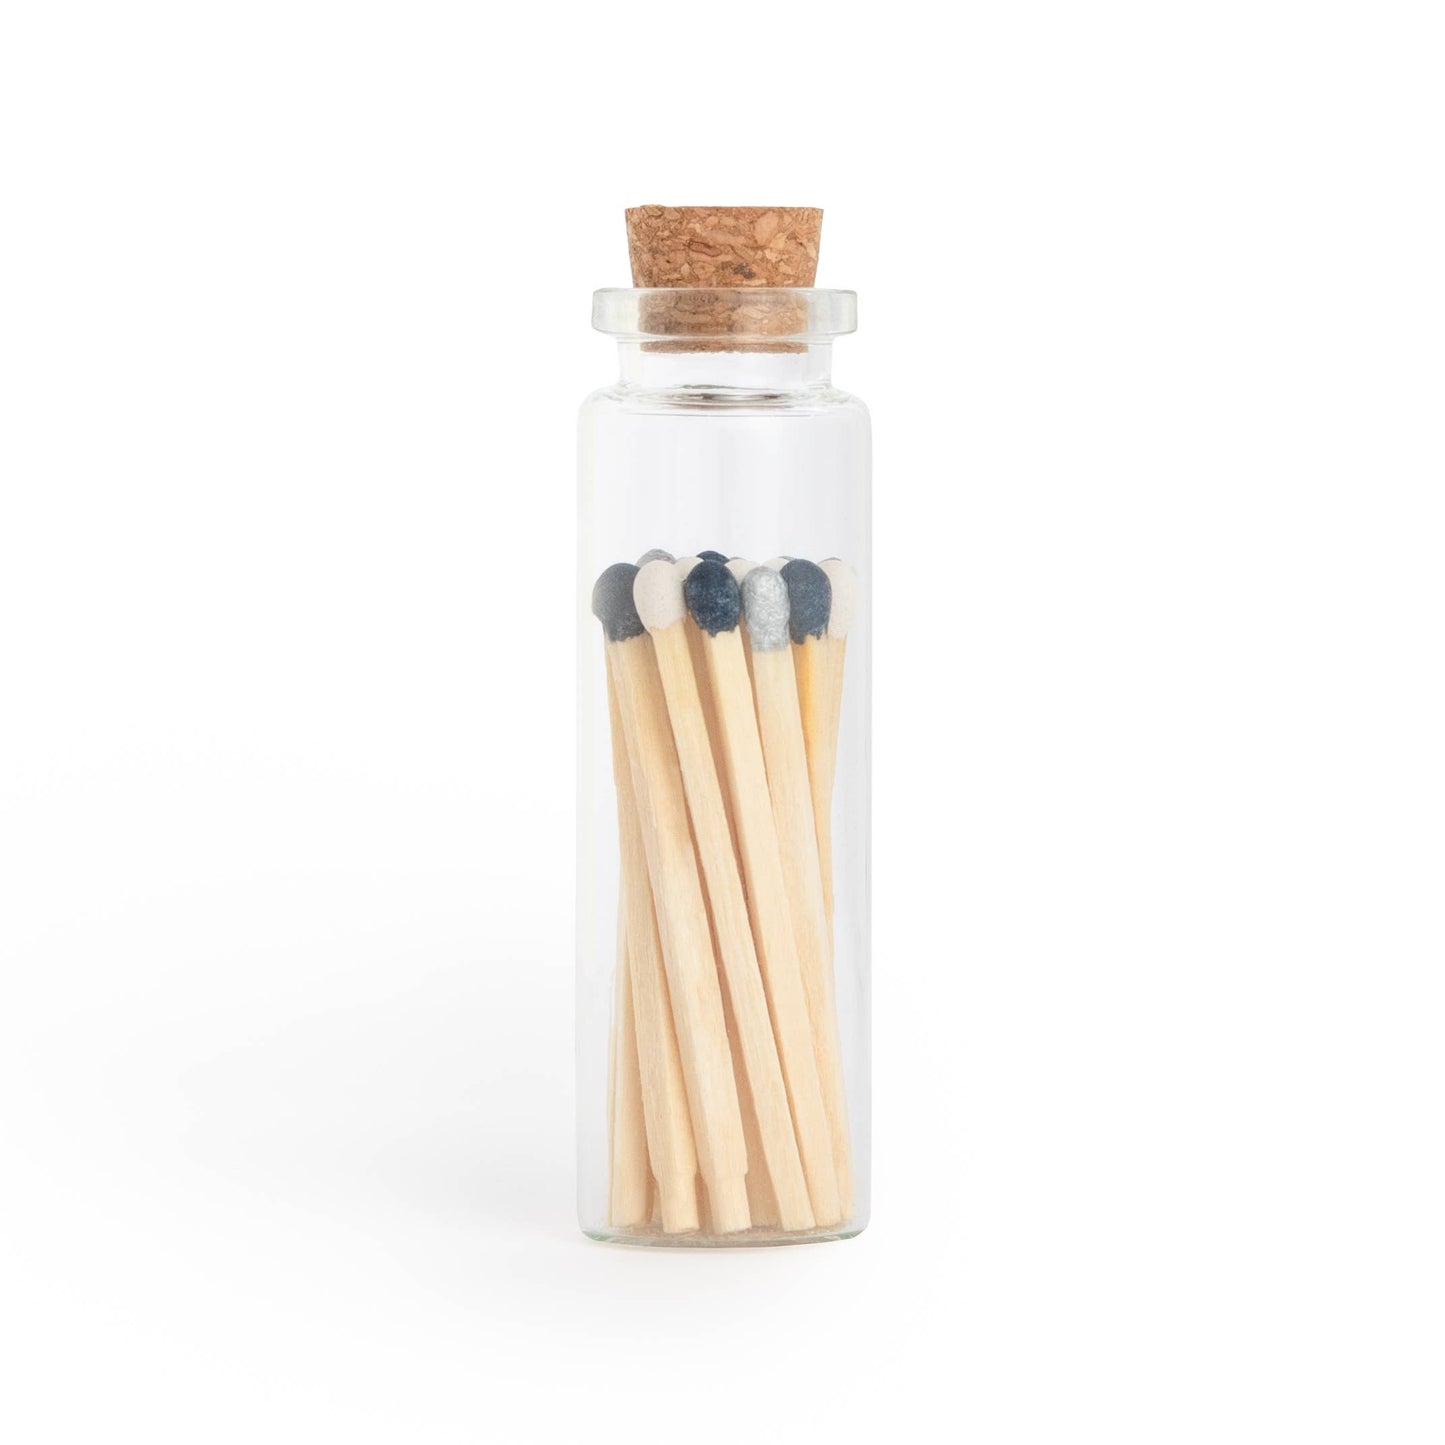 Starry Night Matches in Small Corked Vial